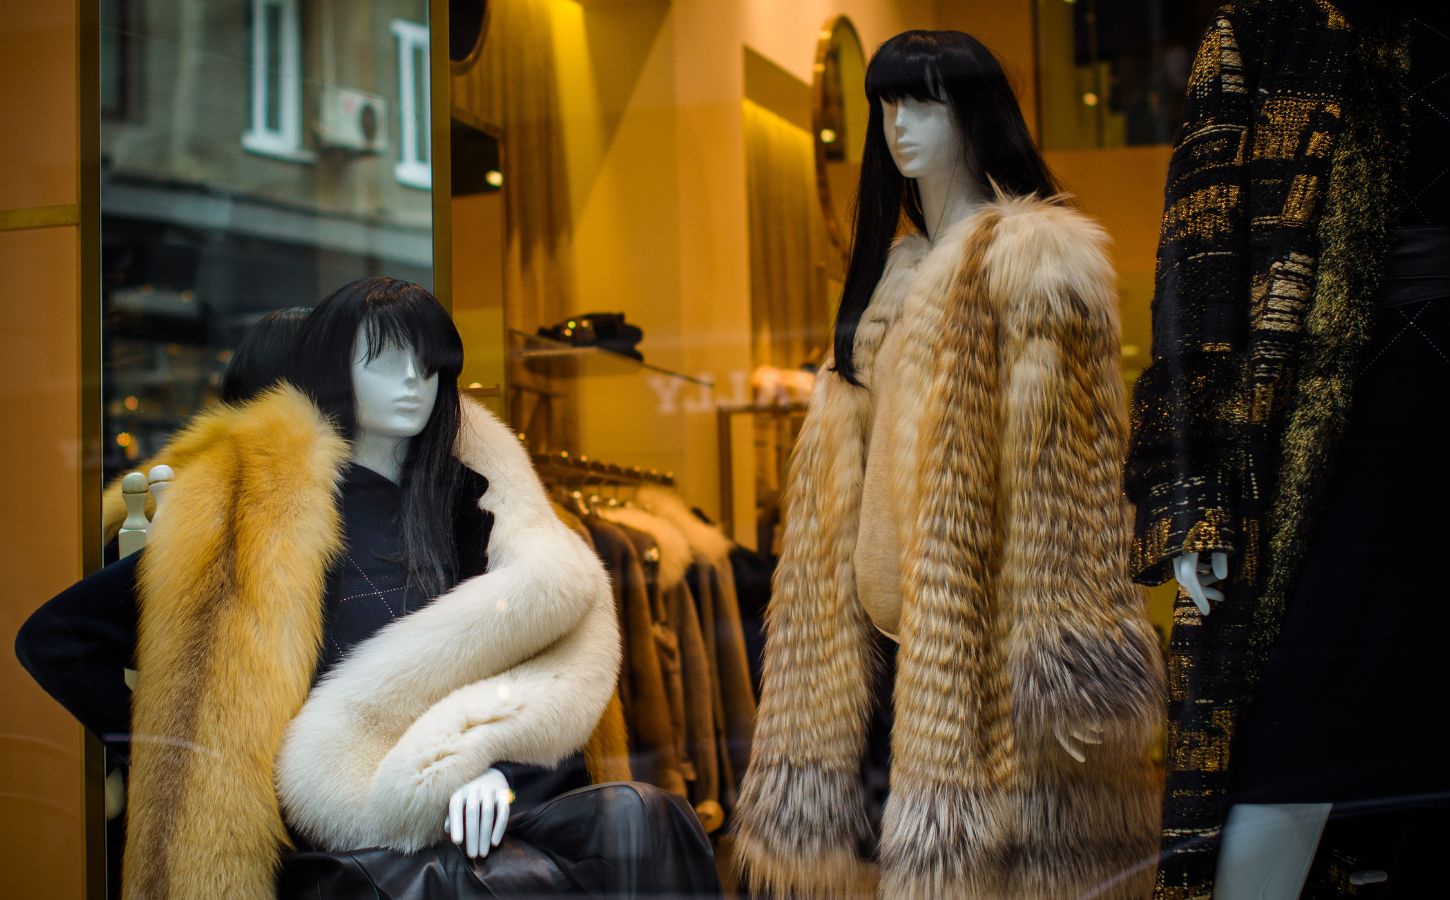 Two mannequins wearing fur coats in a shop window. Fur now cannot be sold in California